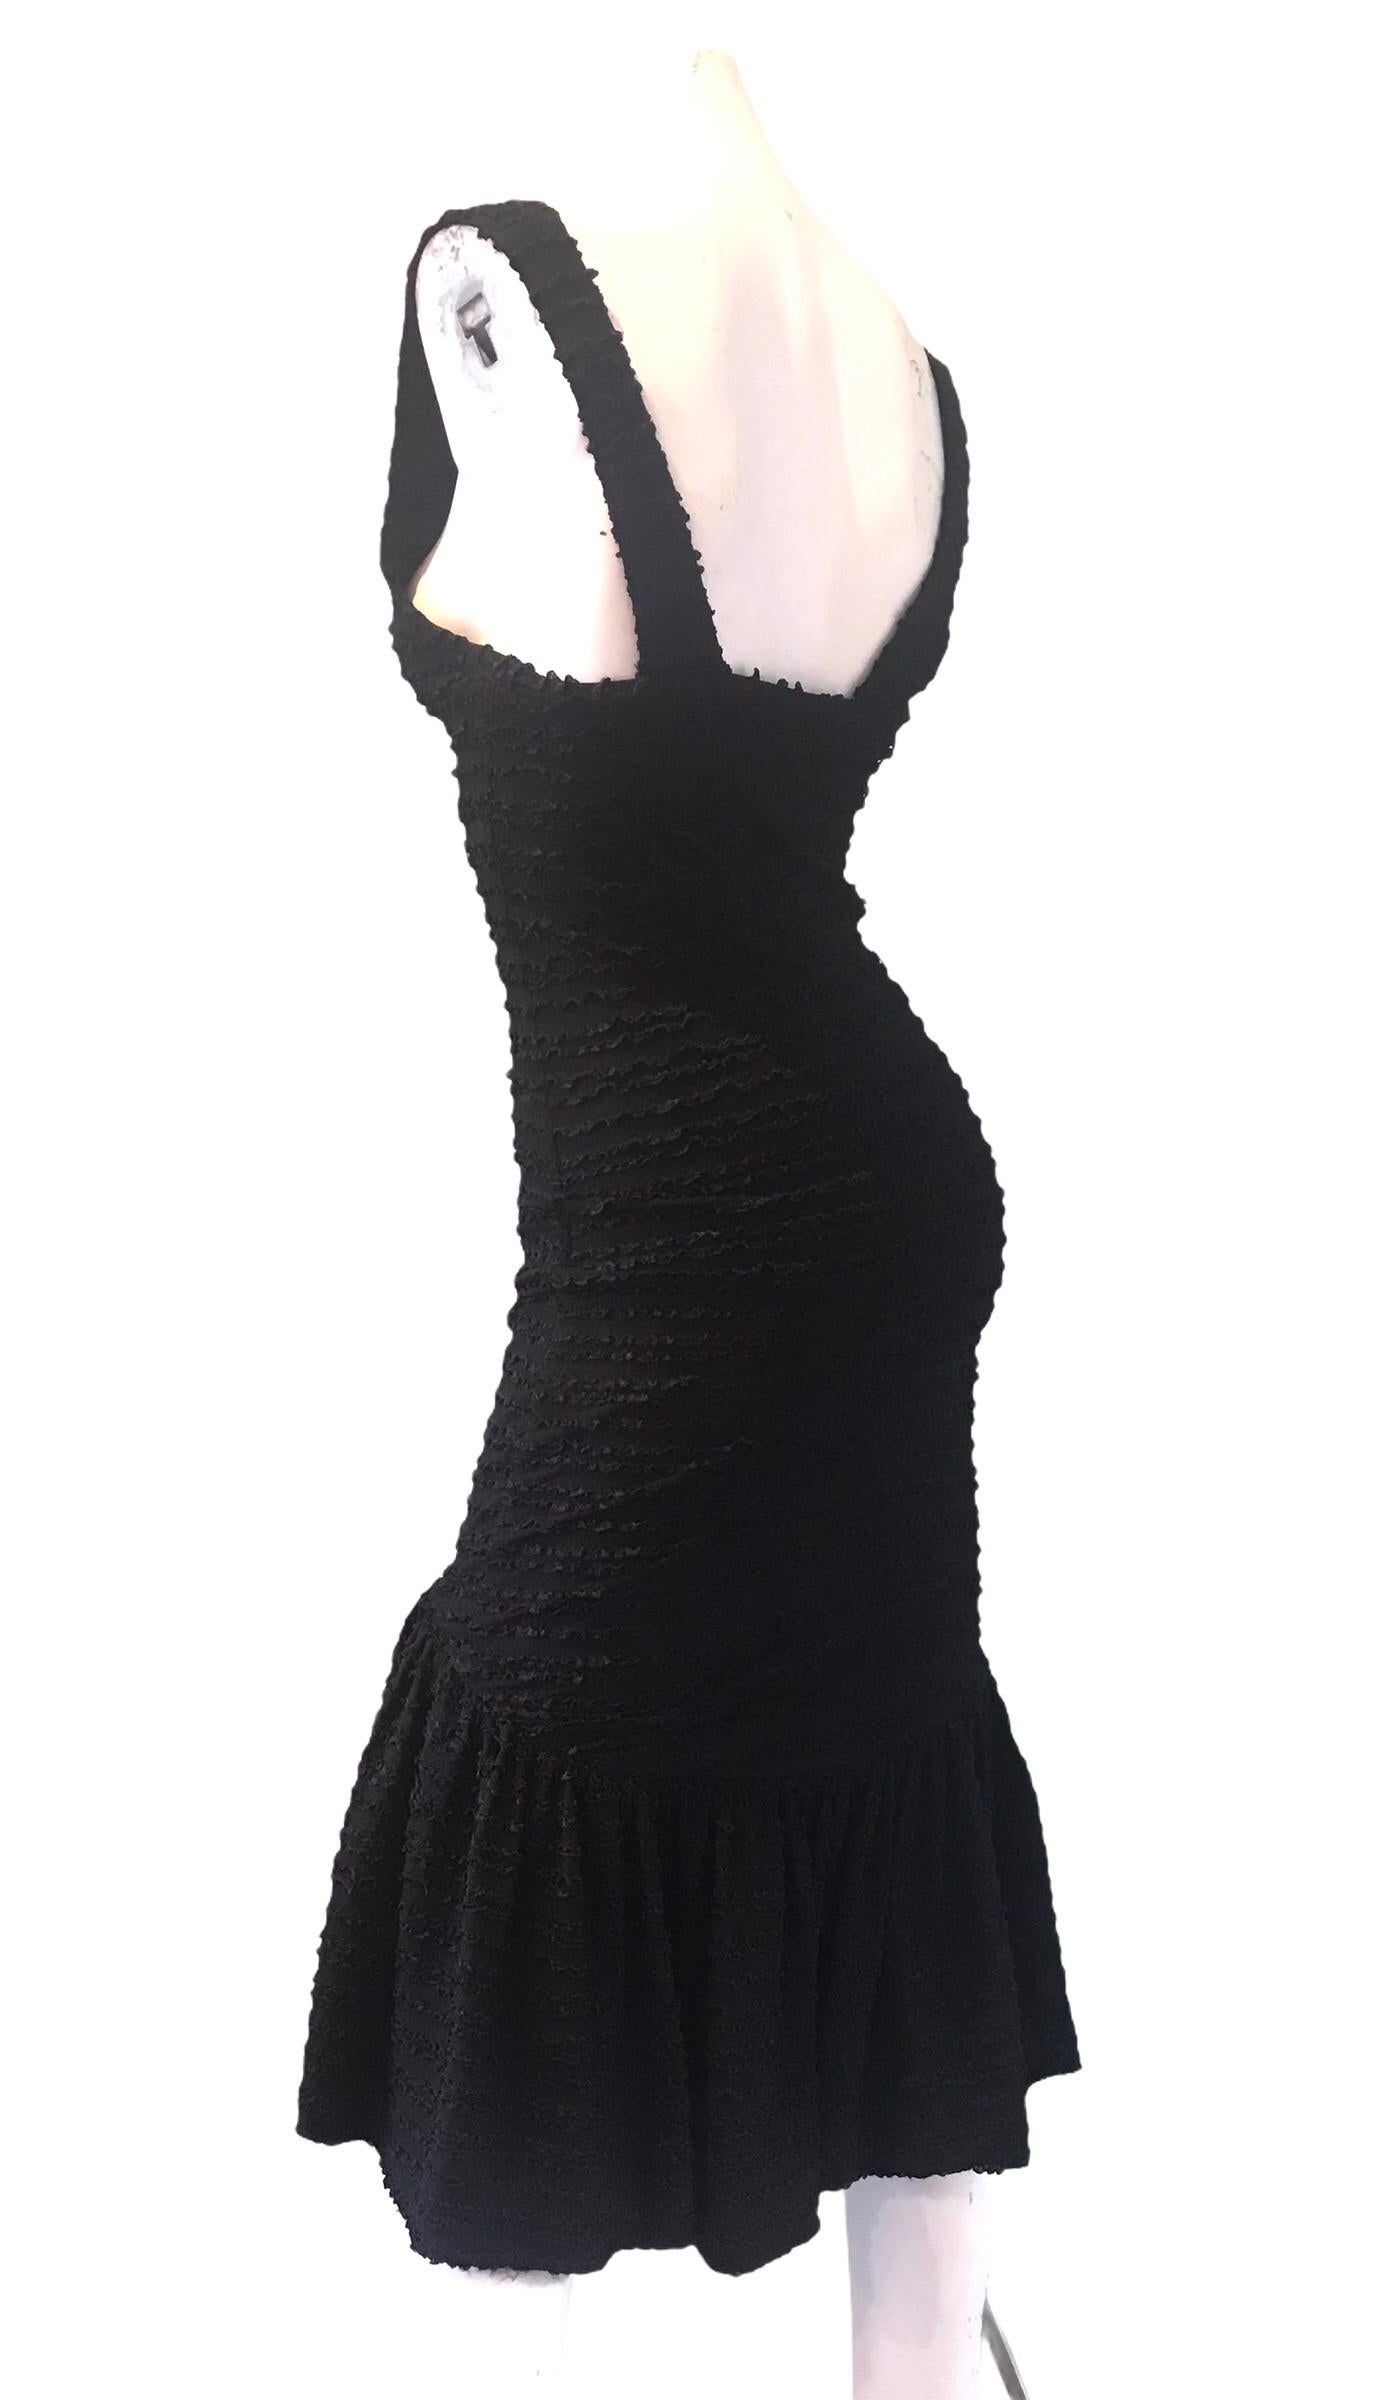 1980s Patrick Kelly black dress with stretch. Condition: Excellent
Size M

27